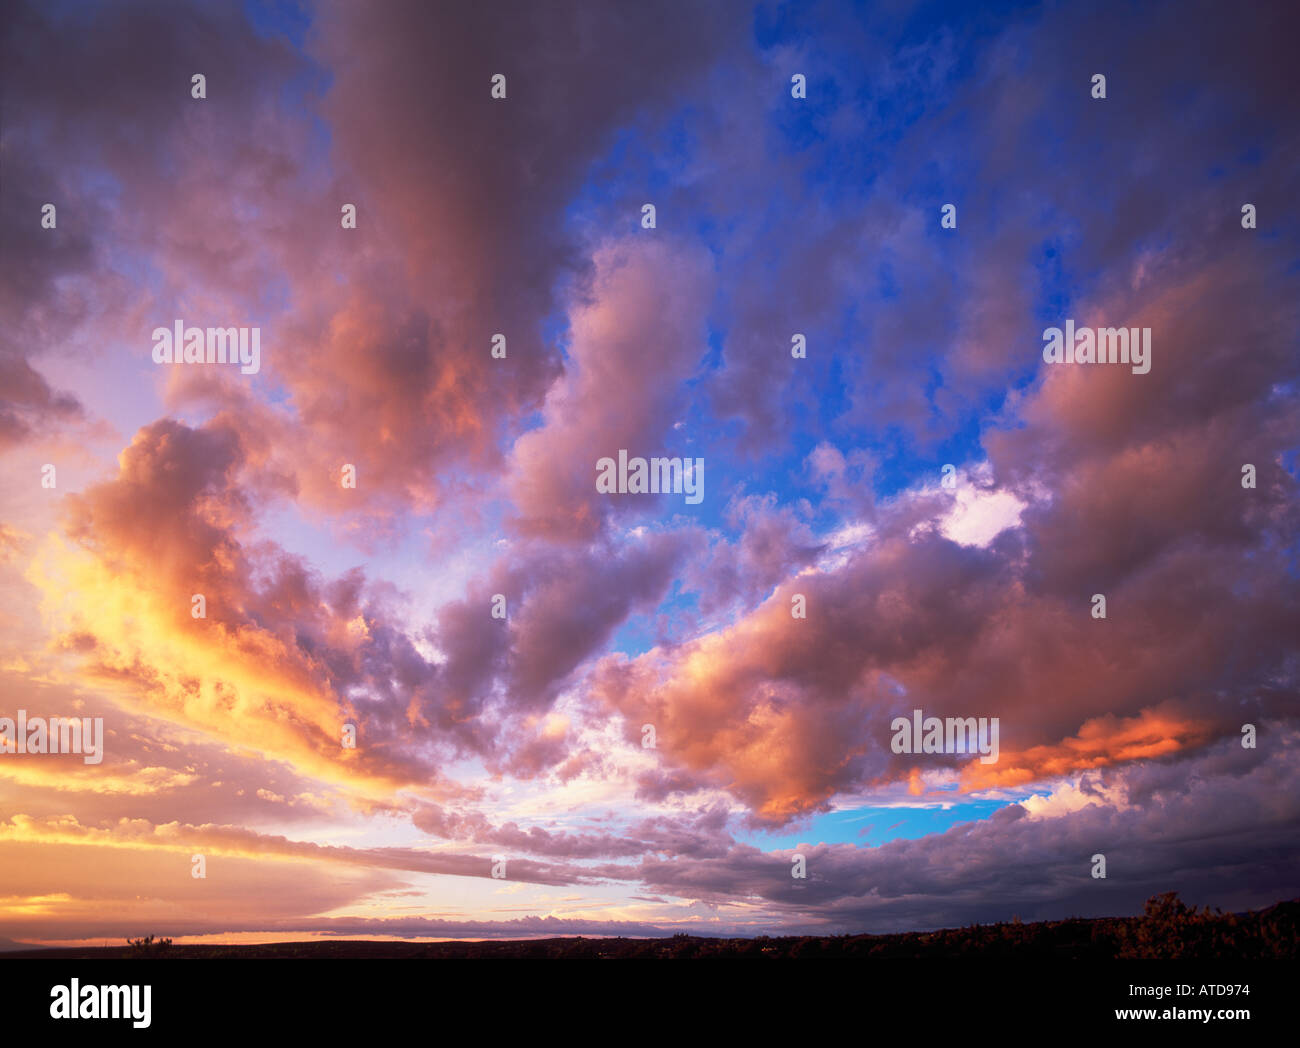 Sunset clouds with shades of yellow pink and orange streak across a vast blue sky Stock Photo